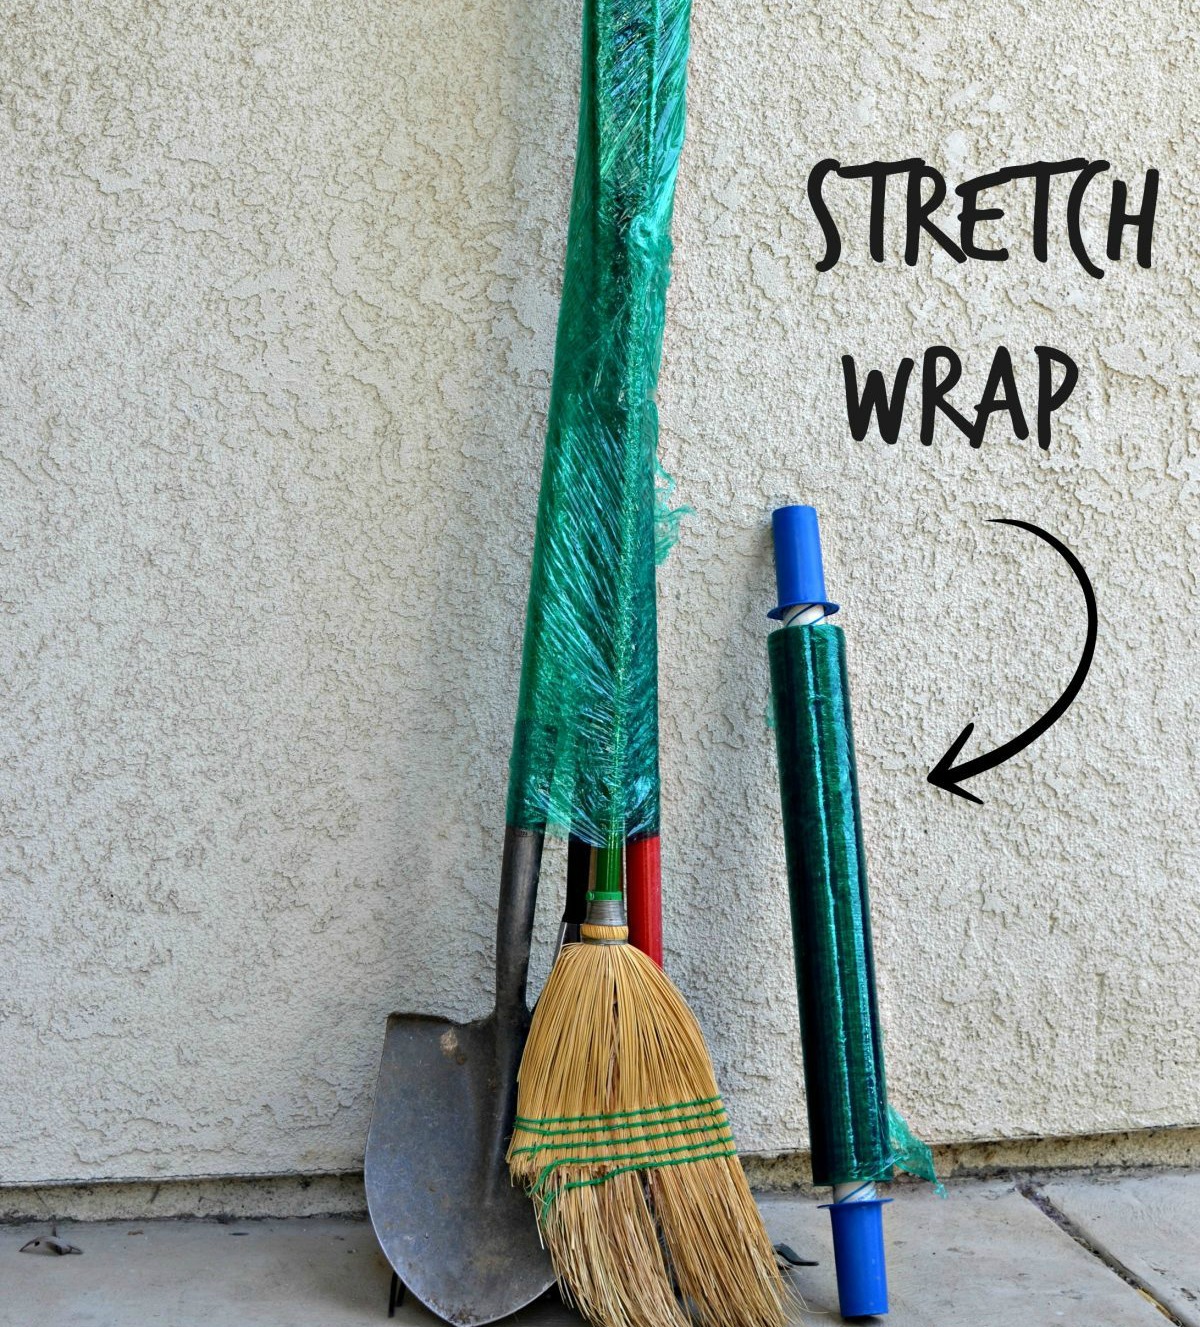 stretch wrap used around brooms and other long-handled tools